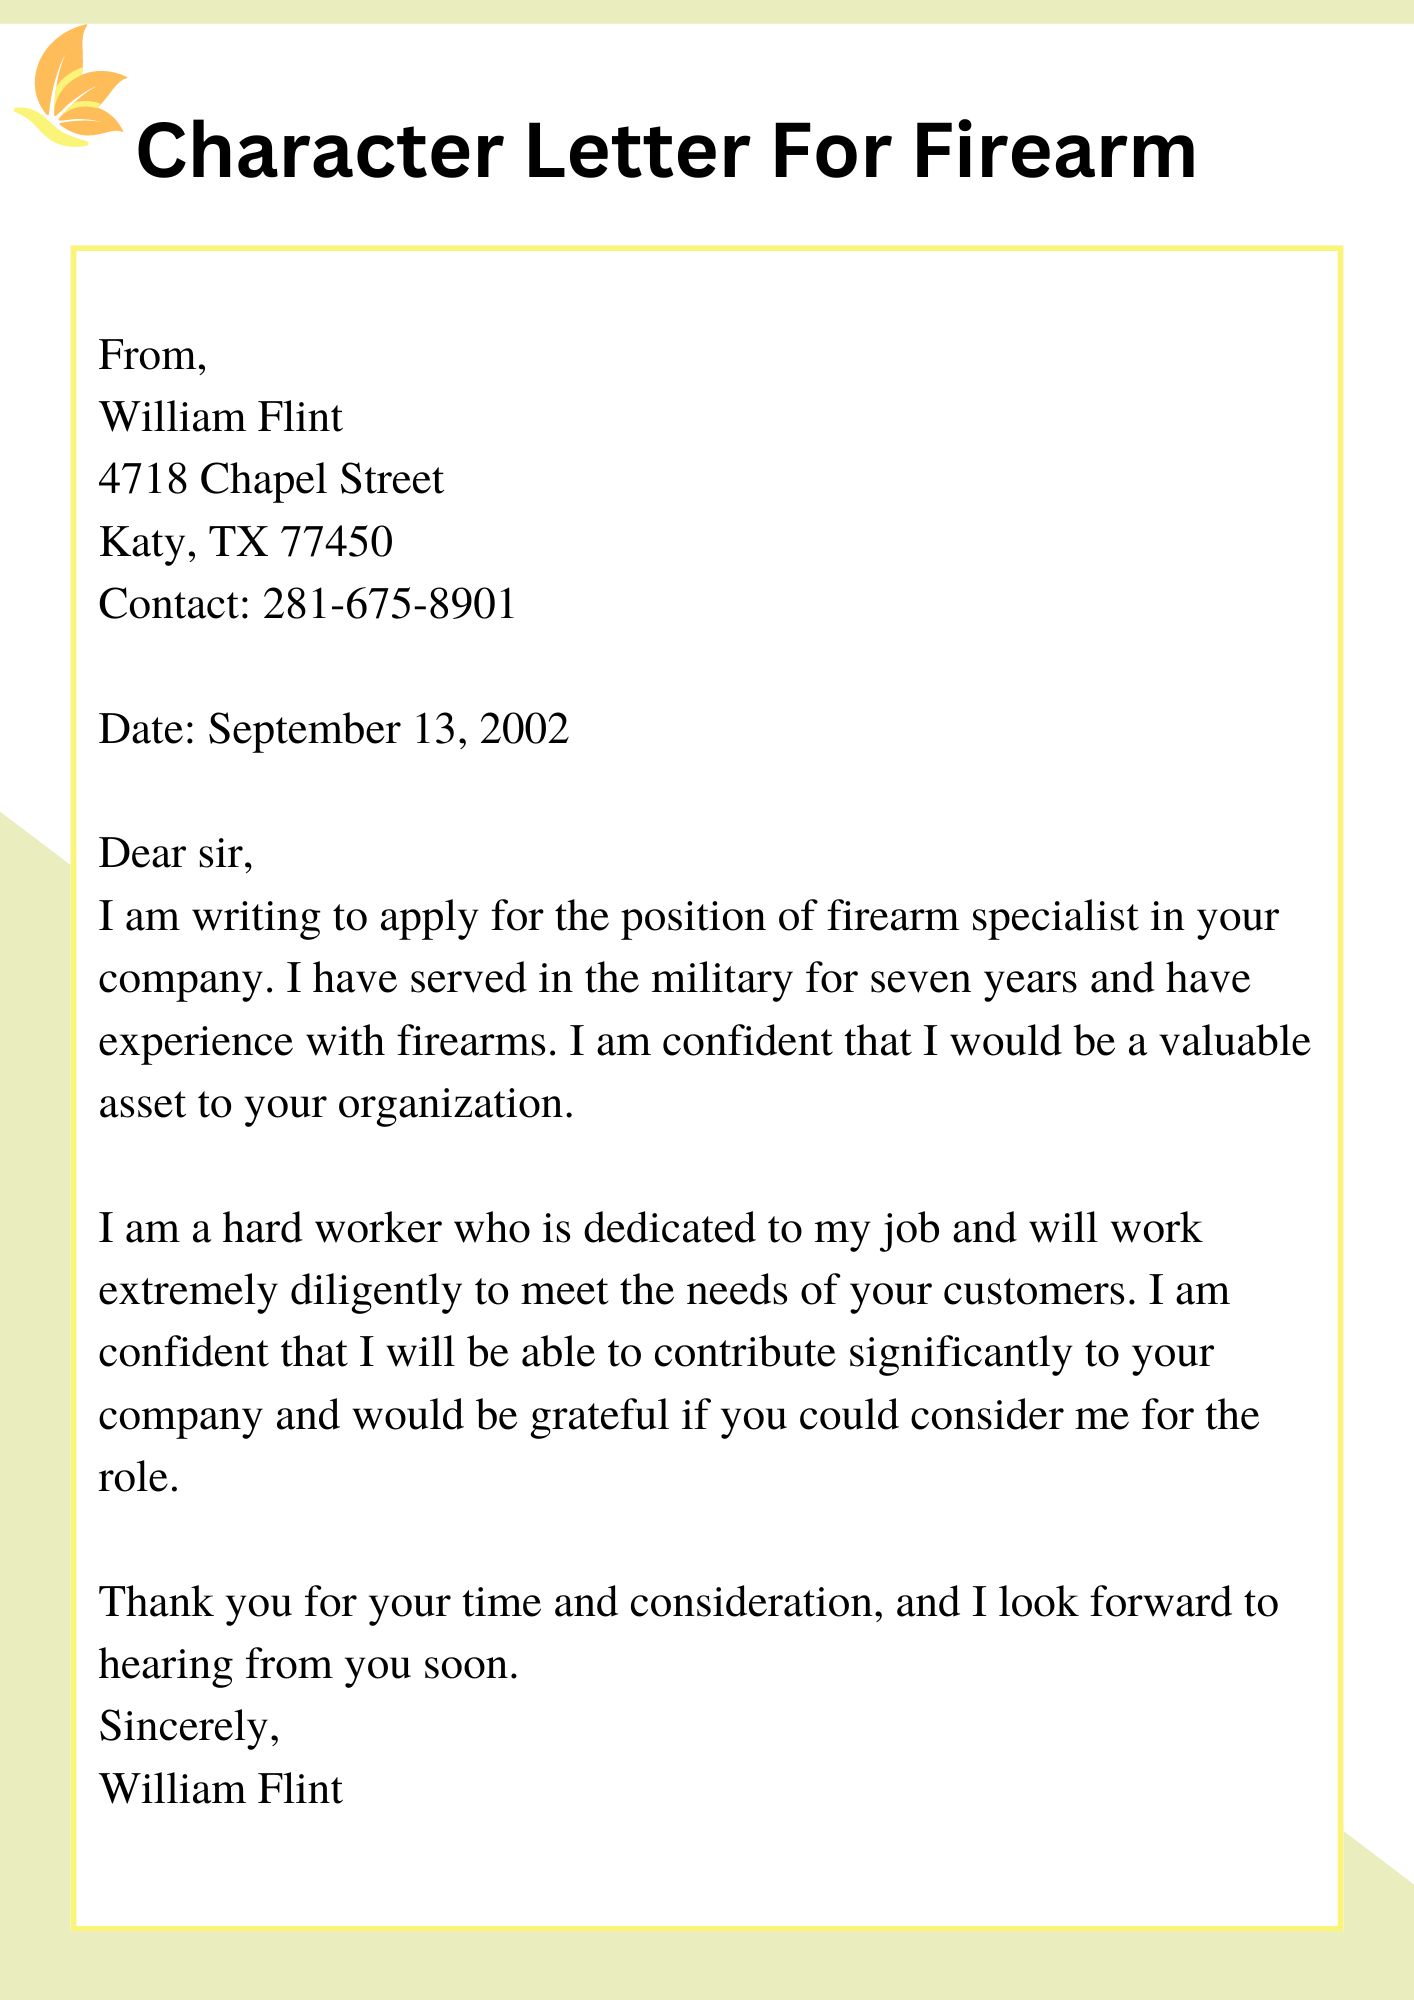 Sample Character Reference Letter For Firearm